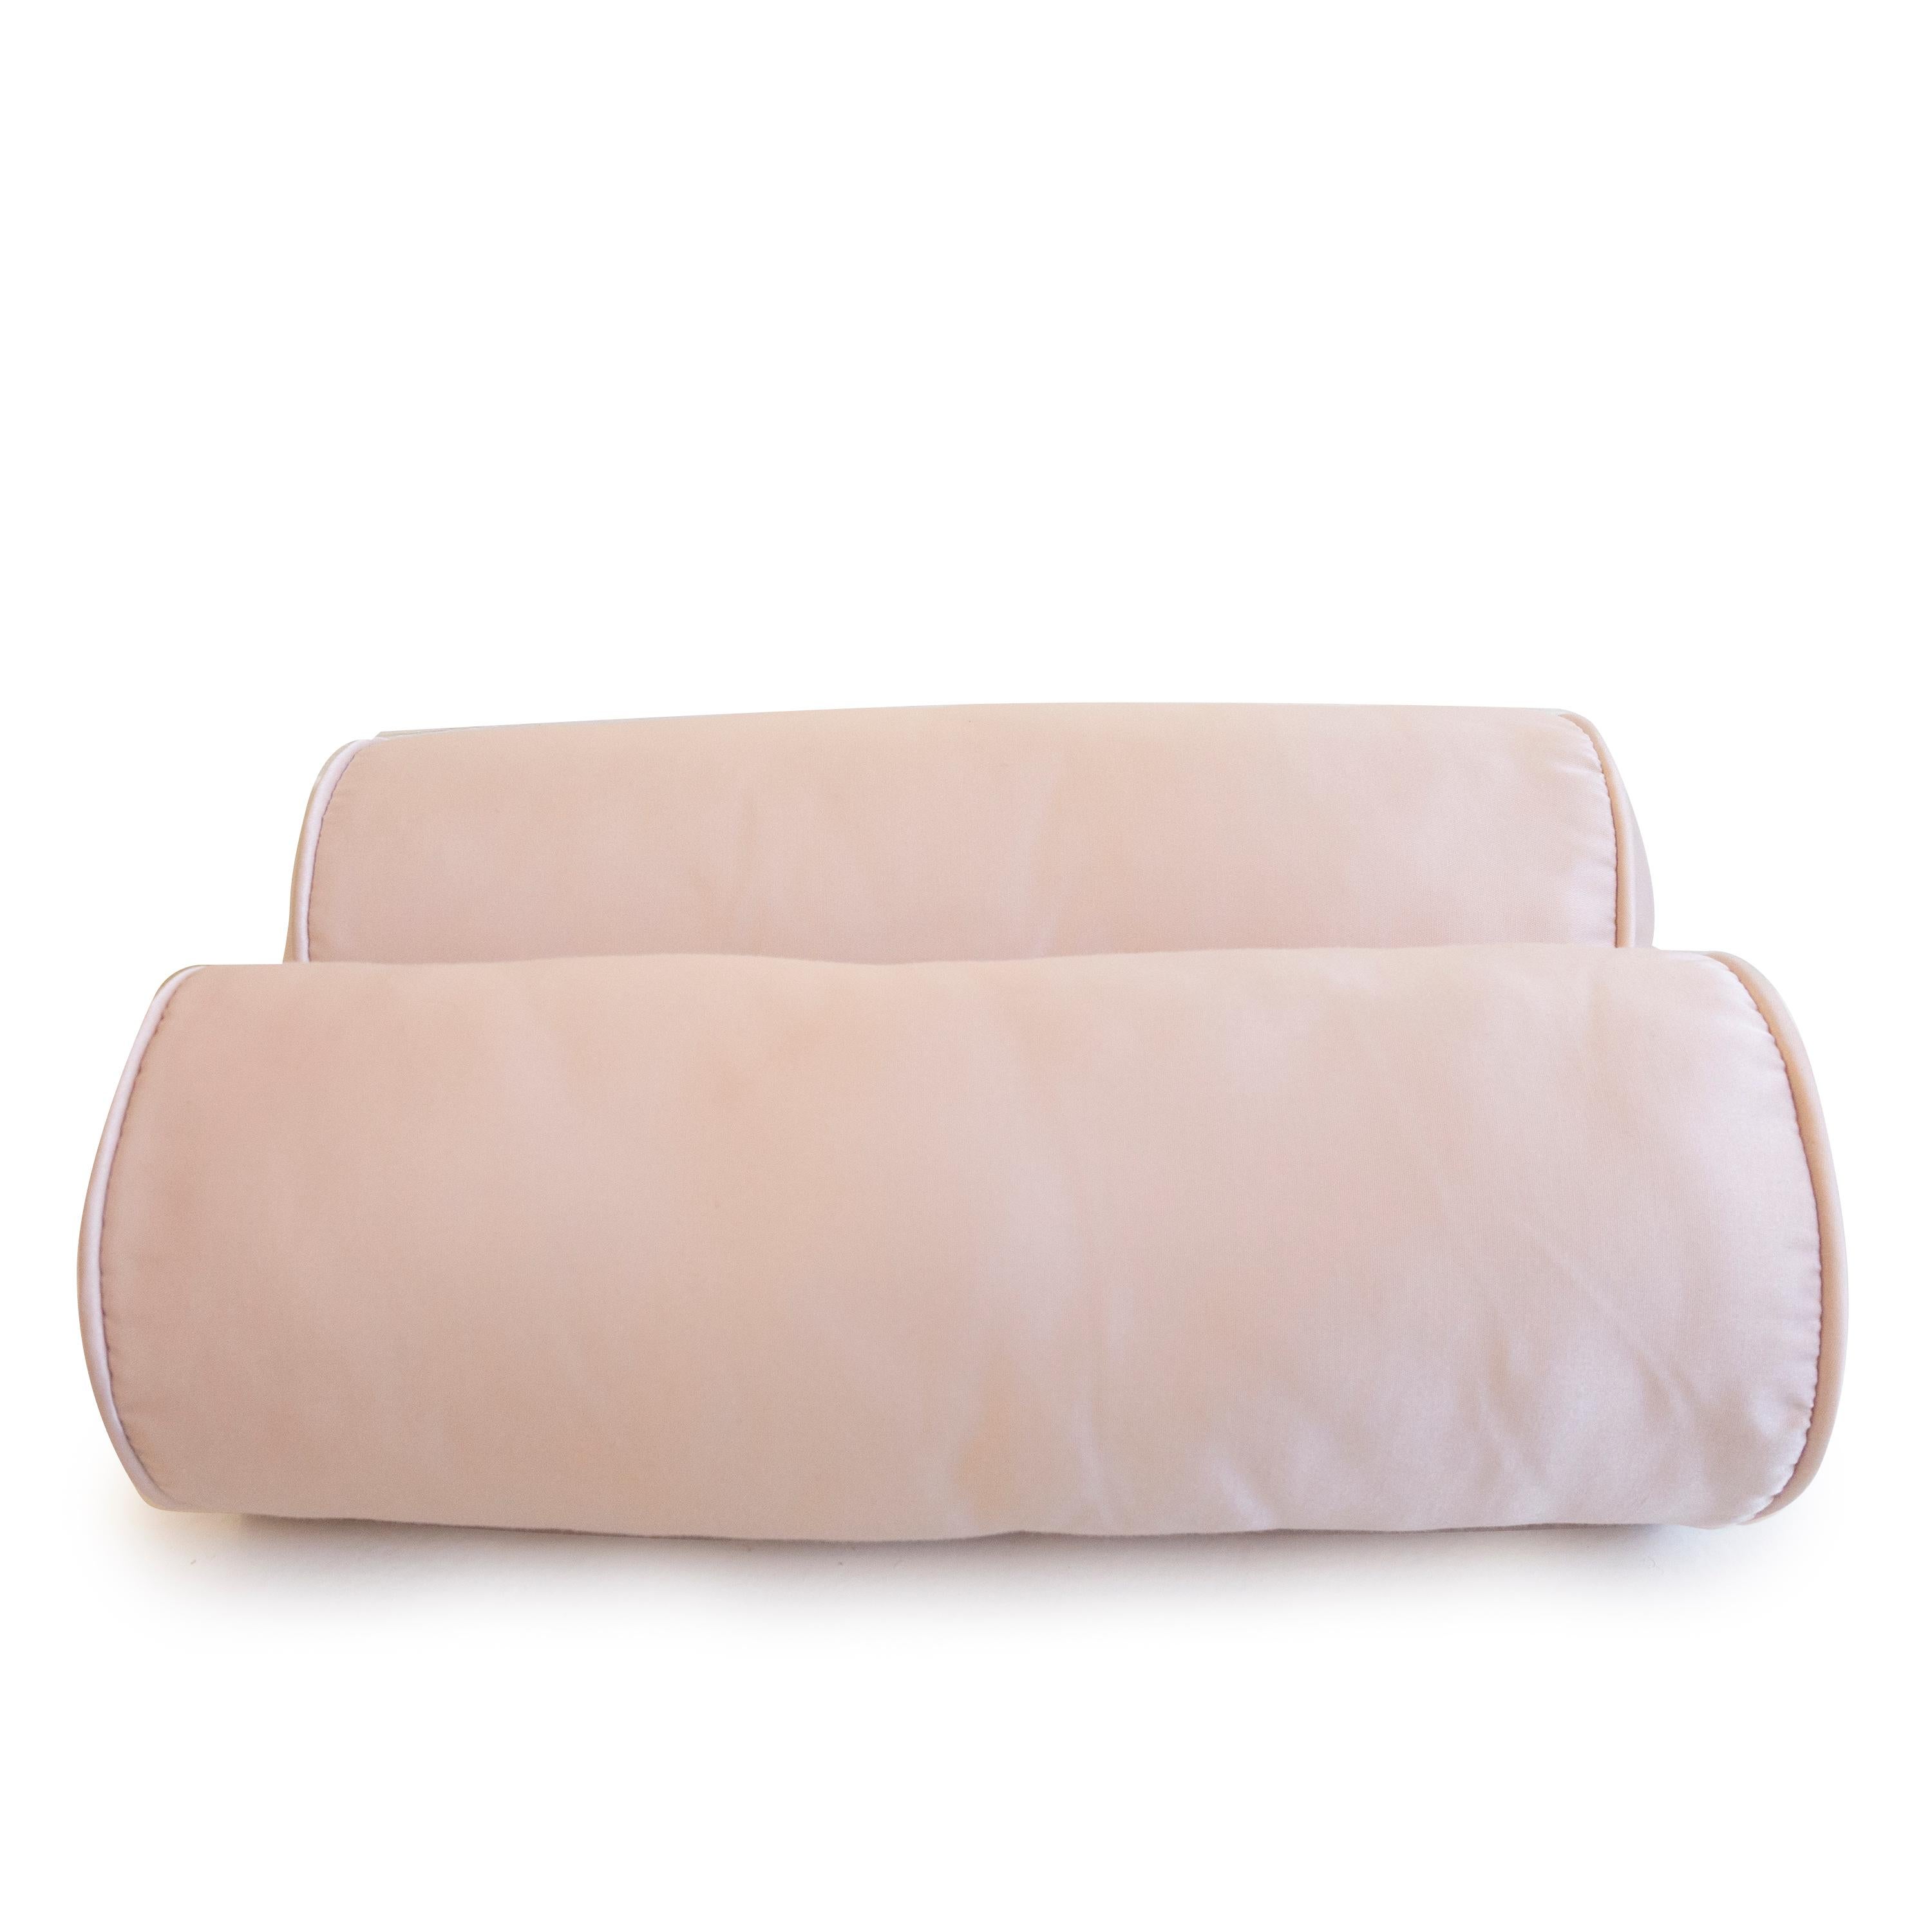 A pair of pink satin bolster pillows. Great for a bed, chair or sofa. Hand sewn in our studio in Norwalk, Connecticut. 

Measurements: 16